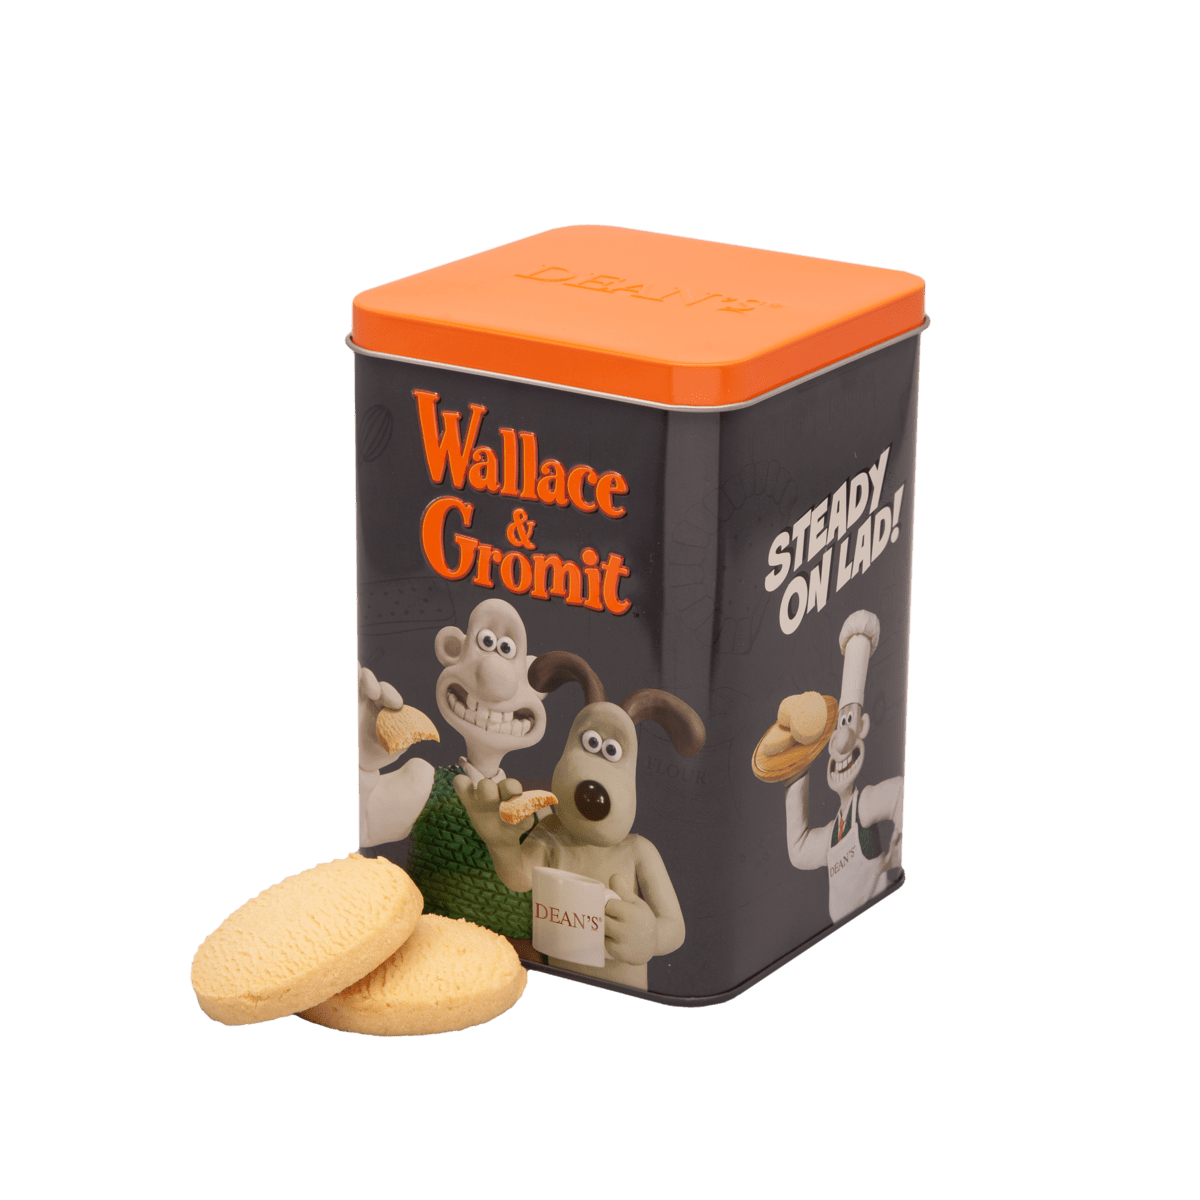 Wallace & Gromit "Steady on" All Butter Shortbread Rounds 300g